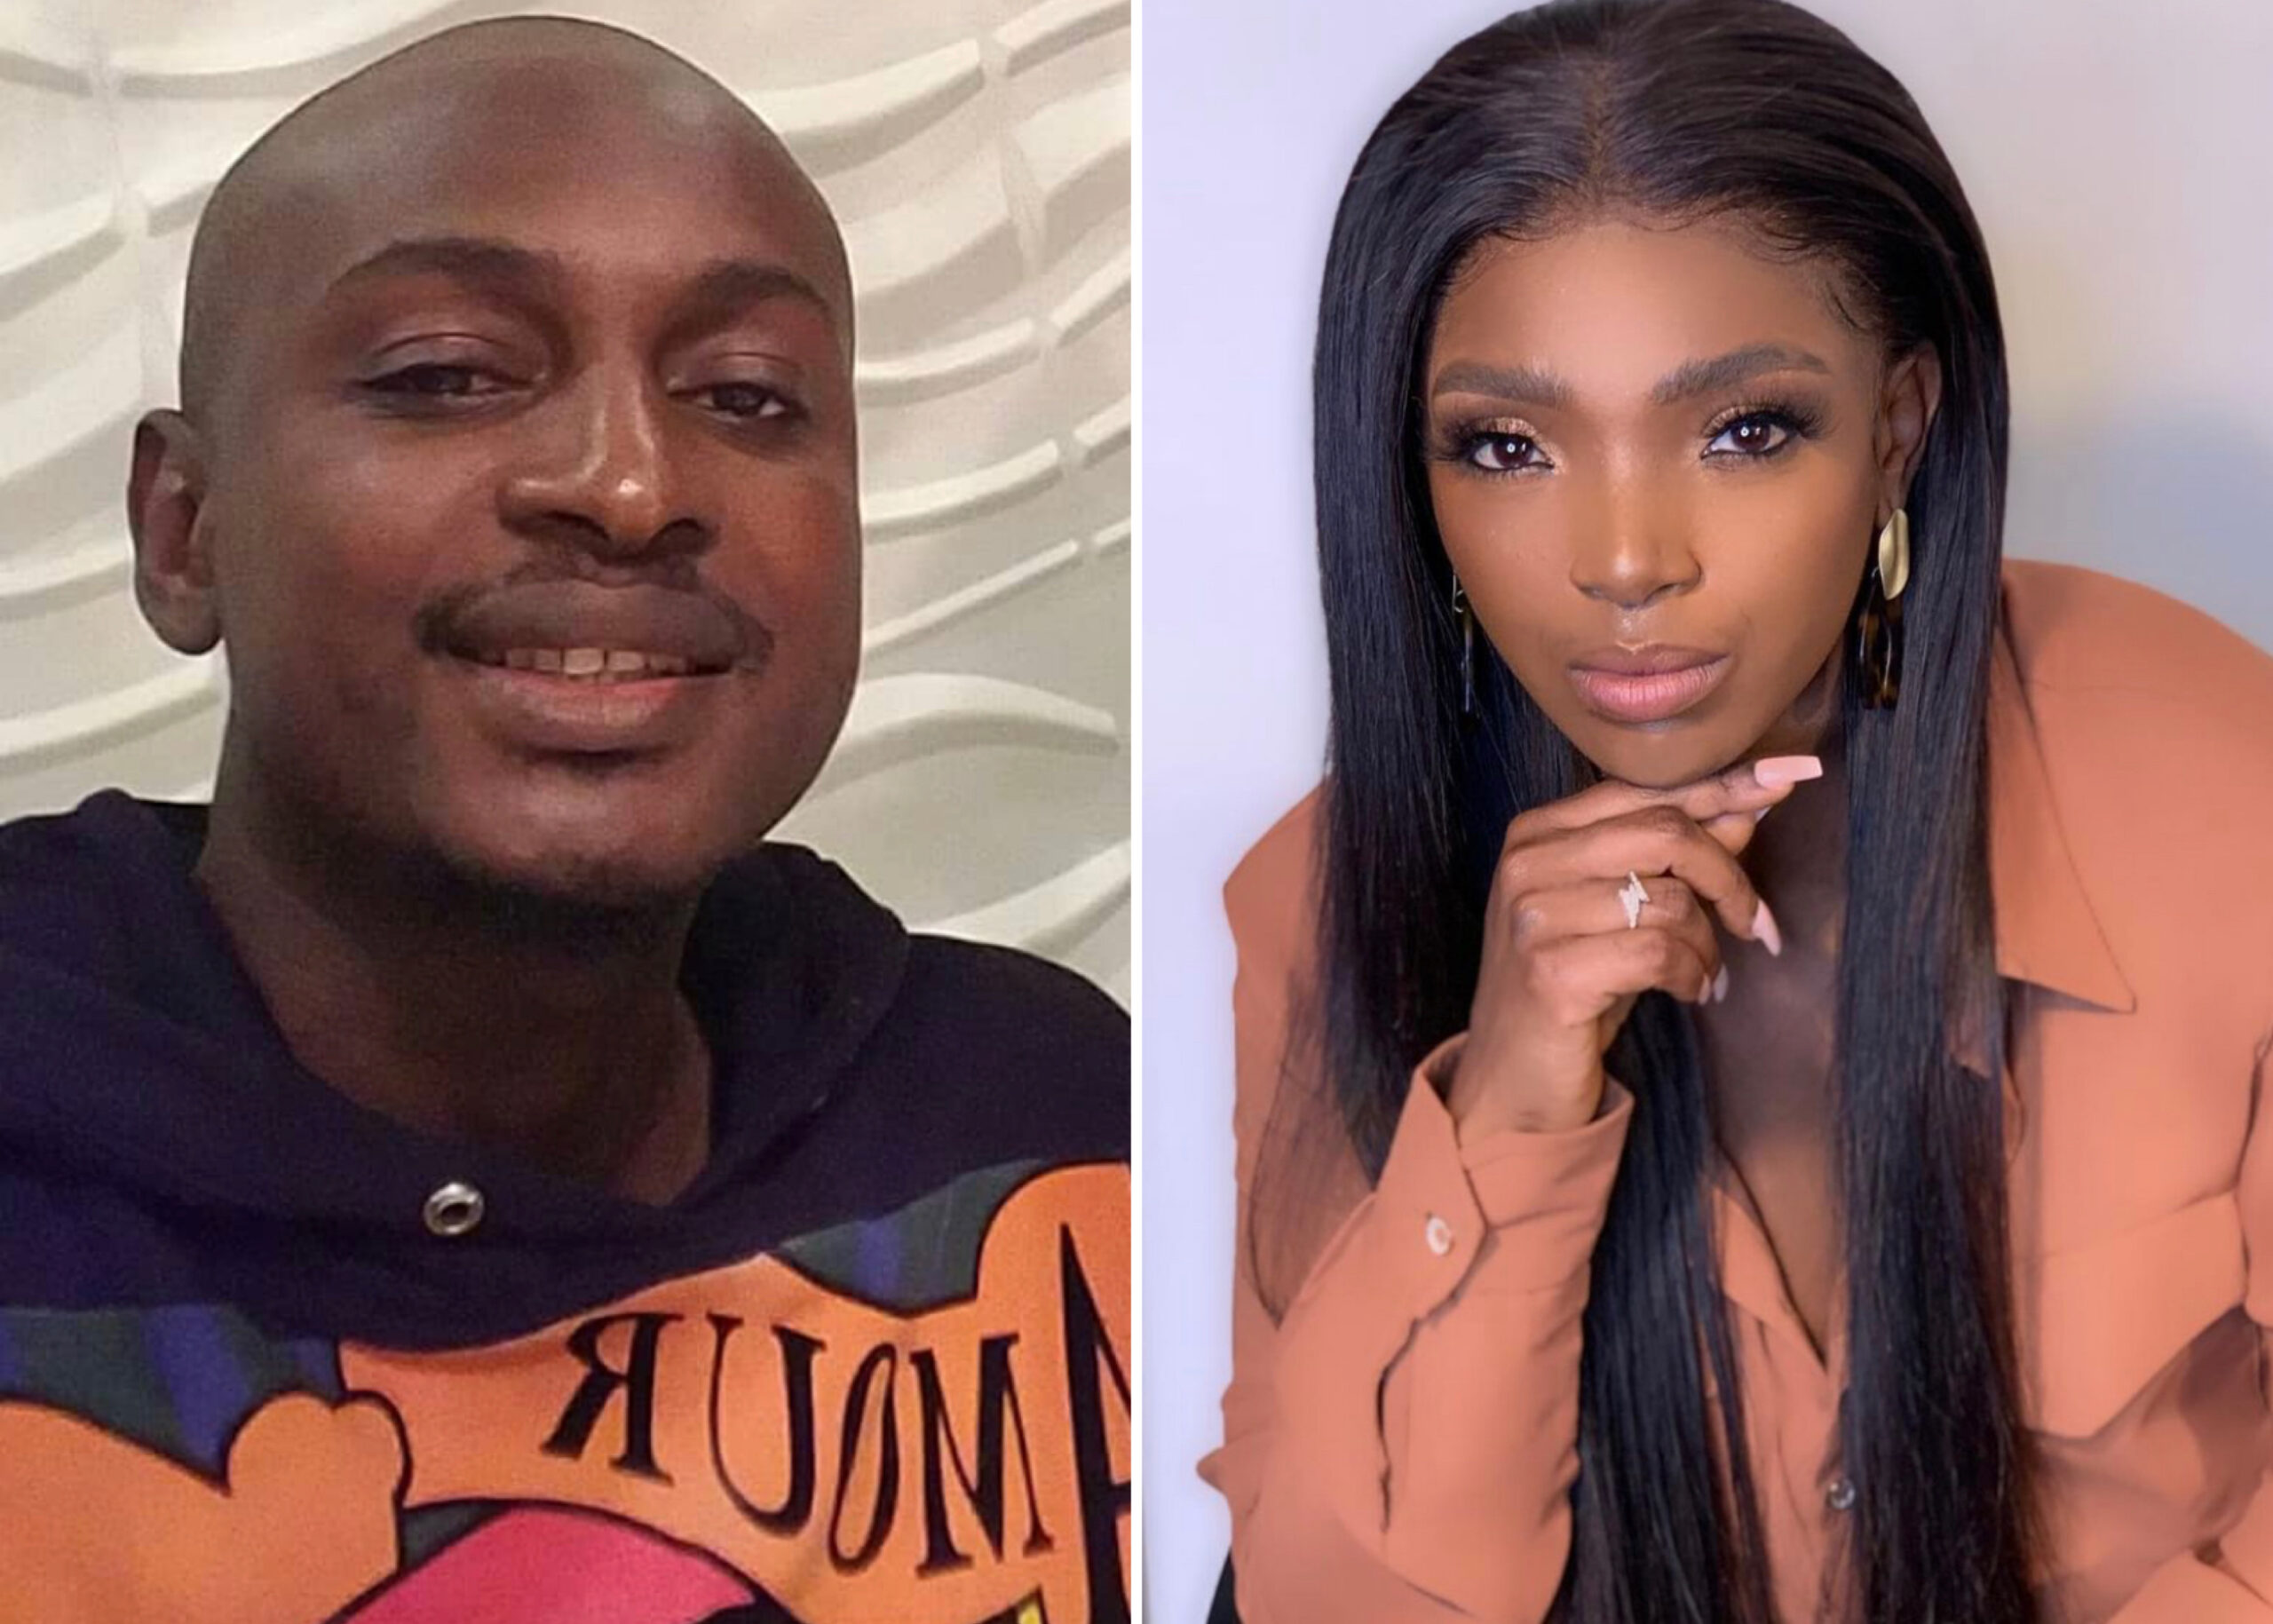 2baba’s Brother, Charles Hit Back At Annie Idibia, Accuses Her Of Being Diabolical, Using Drugs While Slamming Her Mother